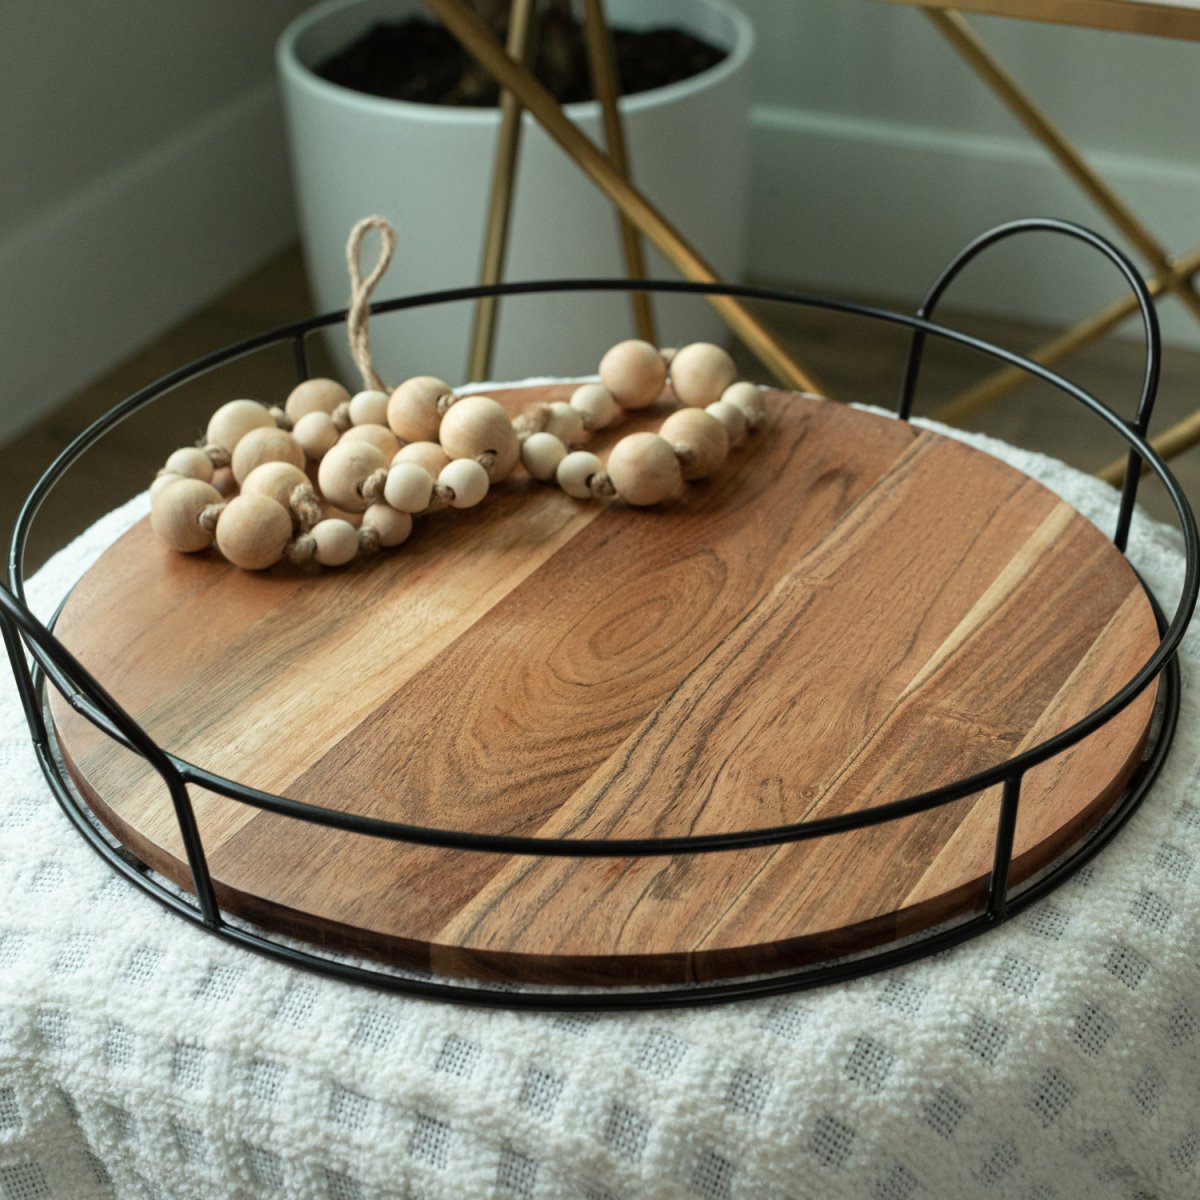 Round Wooden Decor Tray with black metal handles lifestyle image - Aesthetic Living